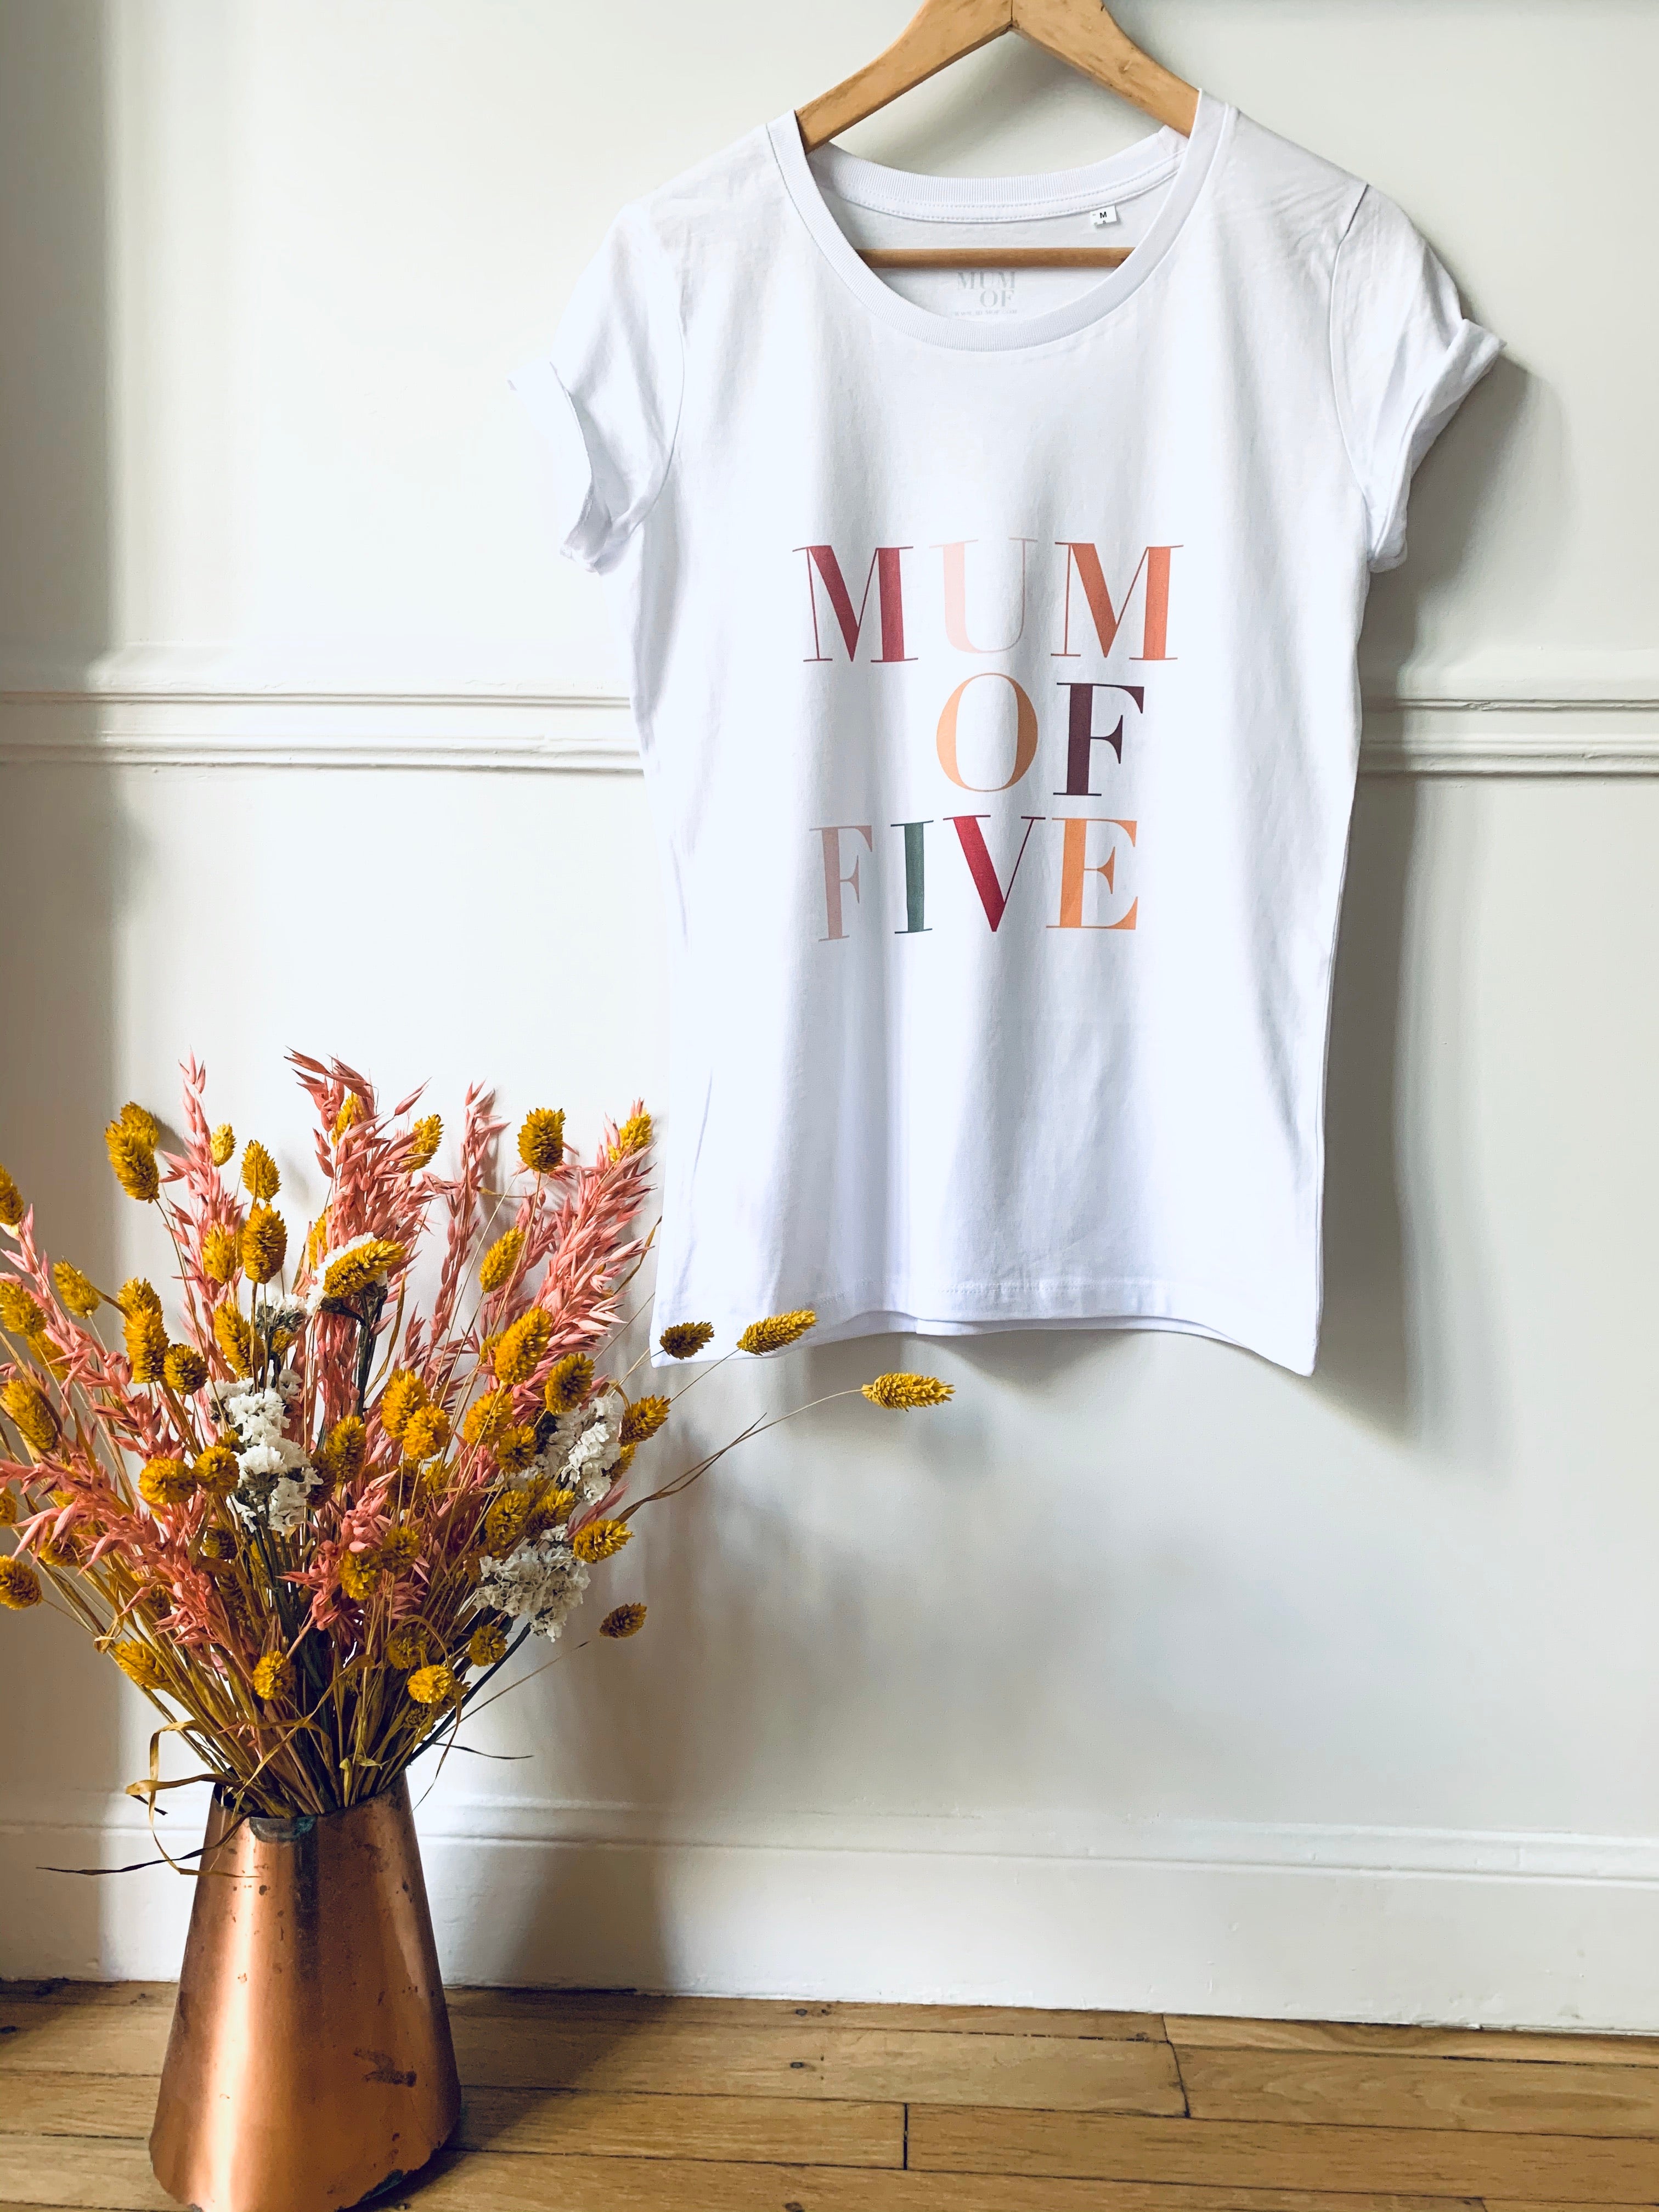 MUM OF FIVE LIMITED EDITION T-SHIRT